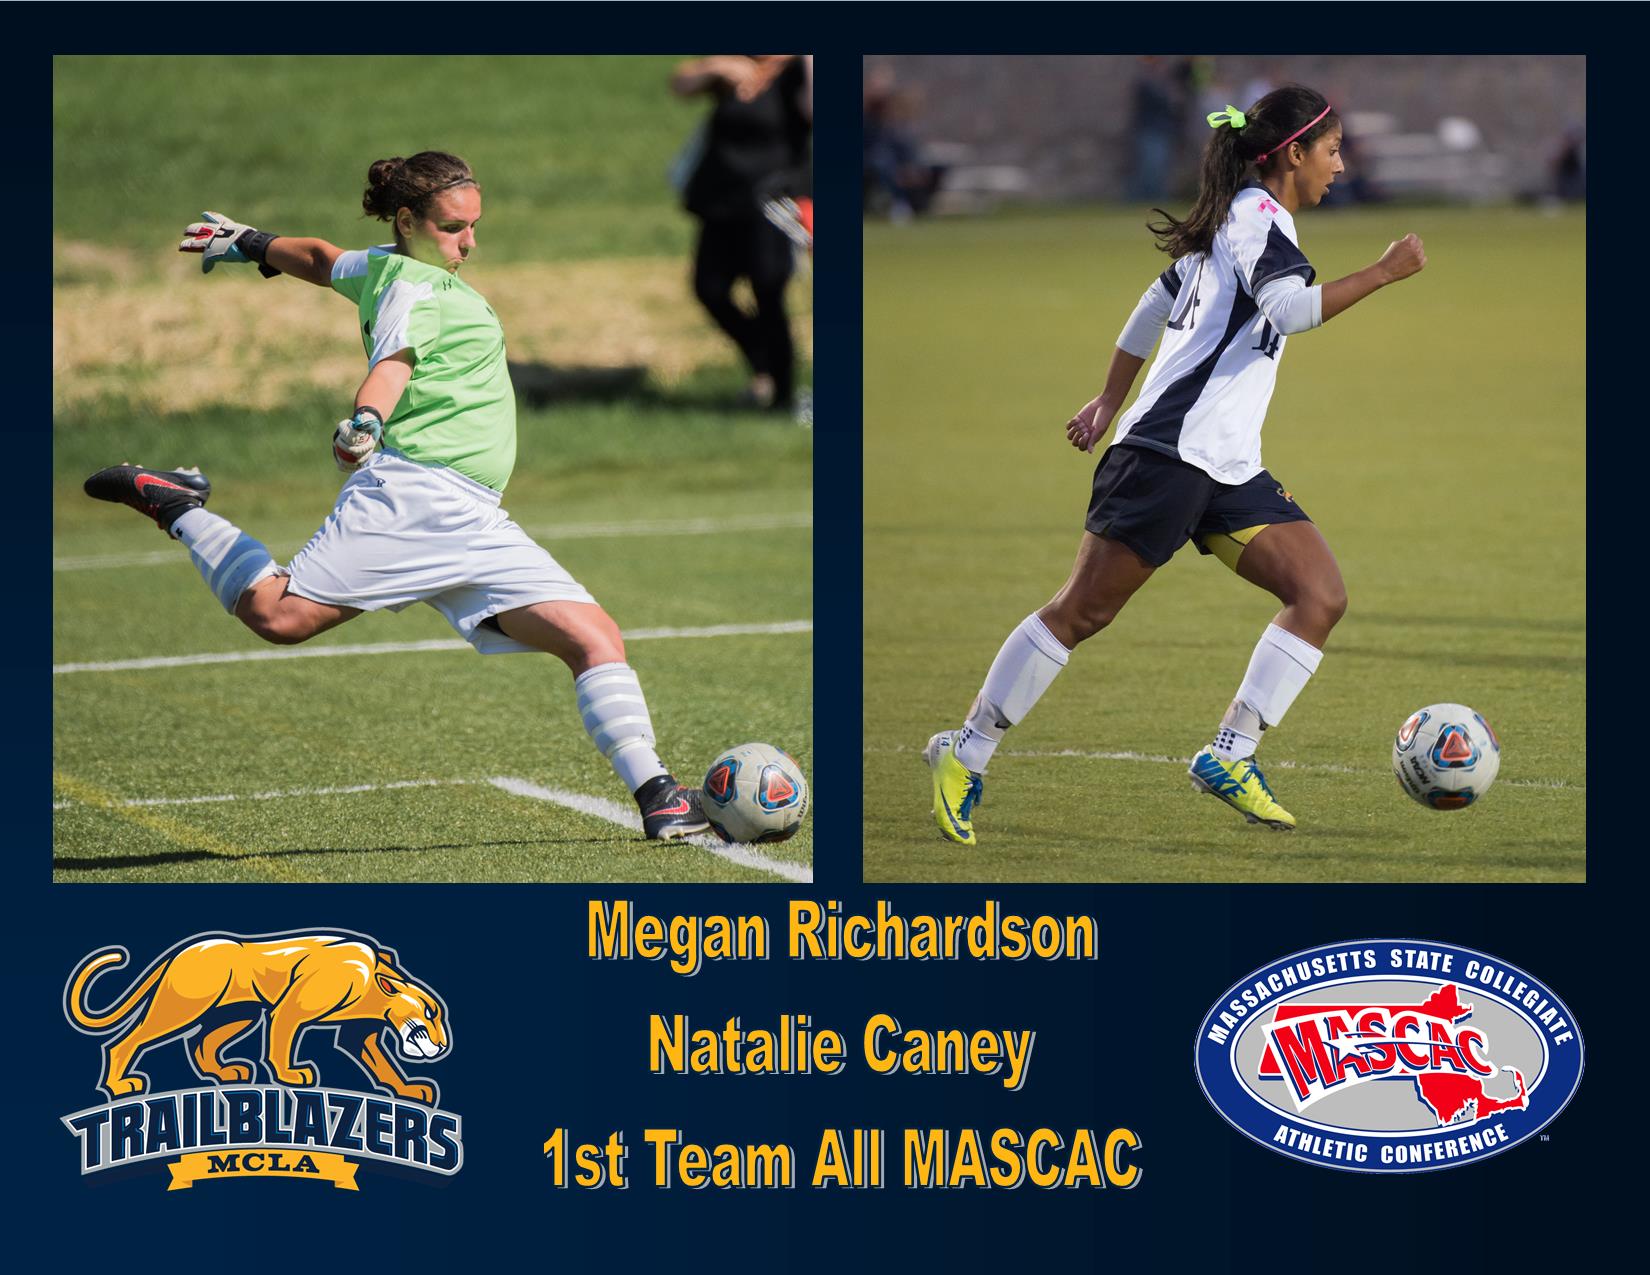 Richardson, Caney named to All MASCAC First team